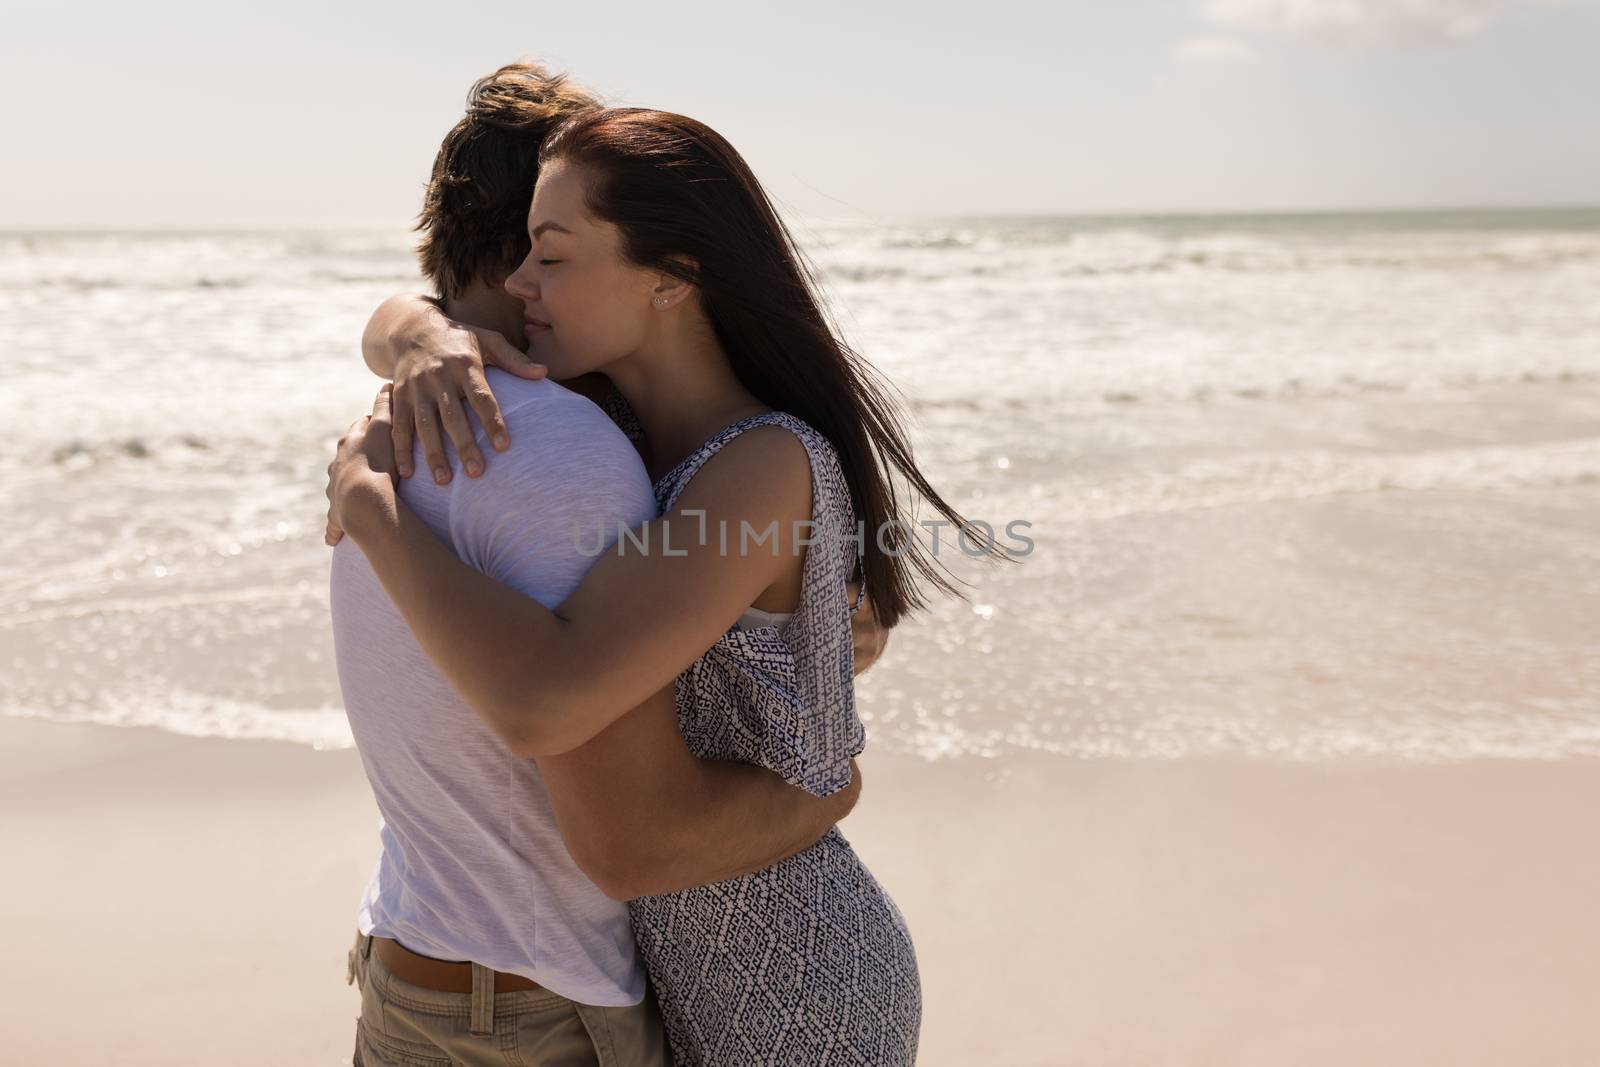 Romantic young couple embracing each other on beach by Wavebreakmedia